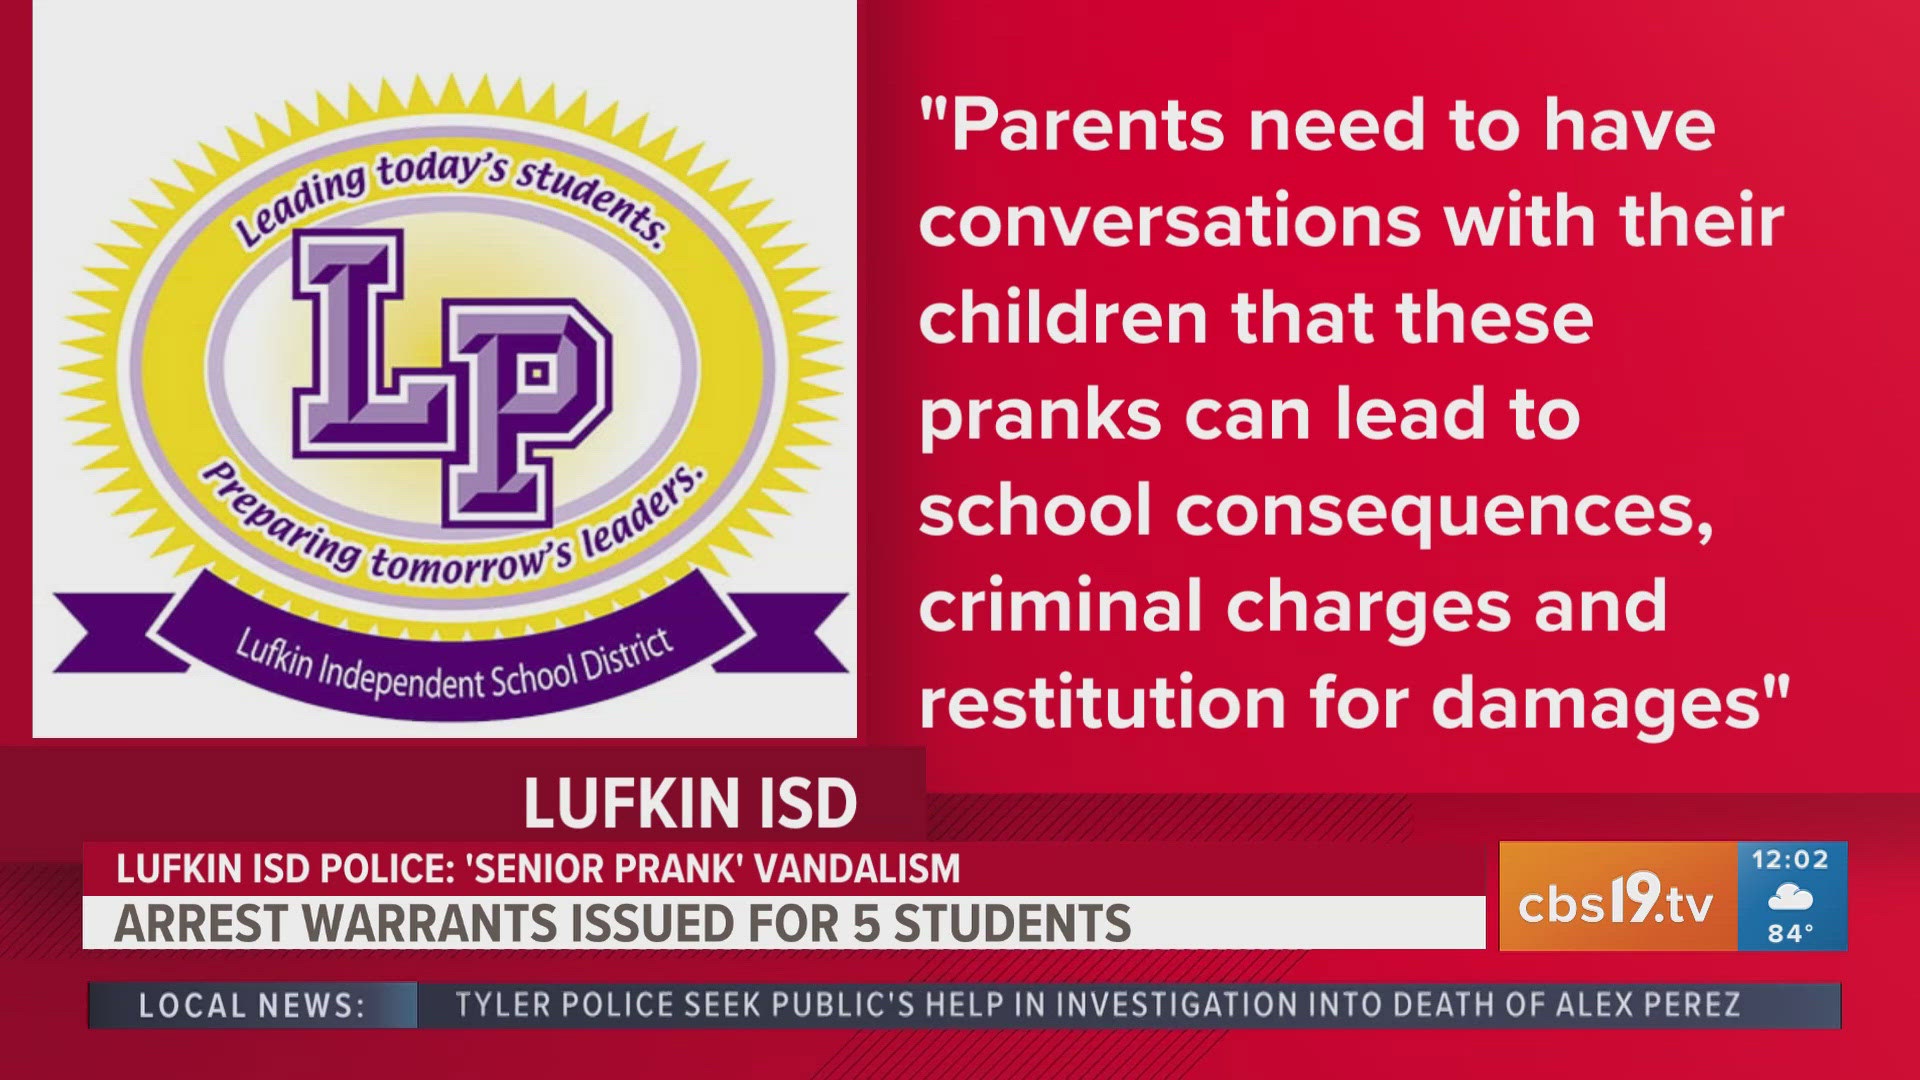 Lufkin ISD police issue warrants for students accused of vandalizing high school in 'senior prank'